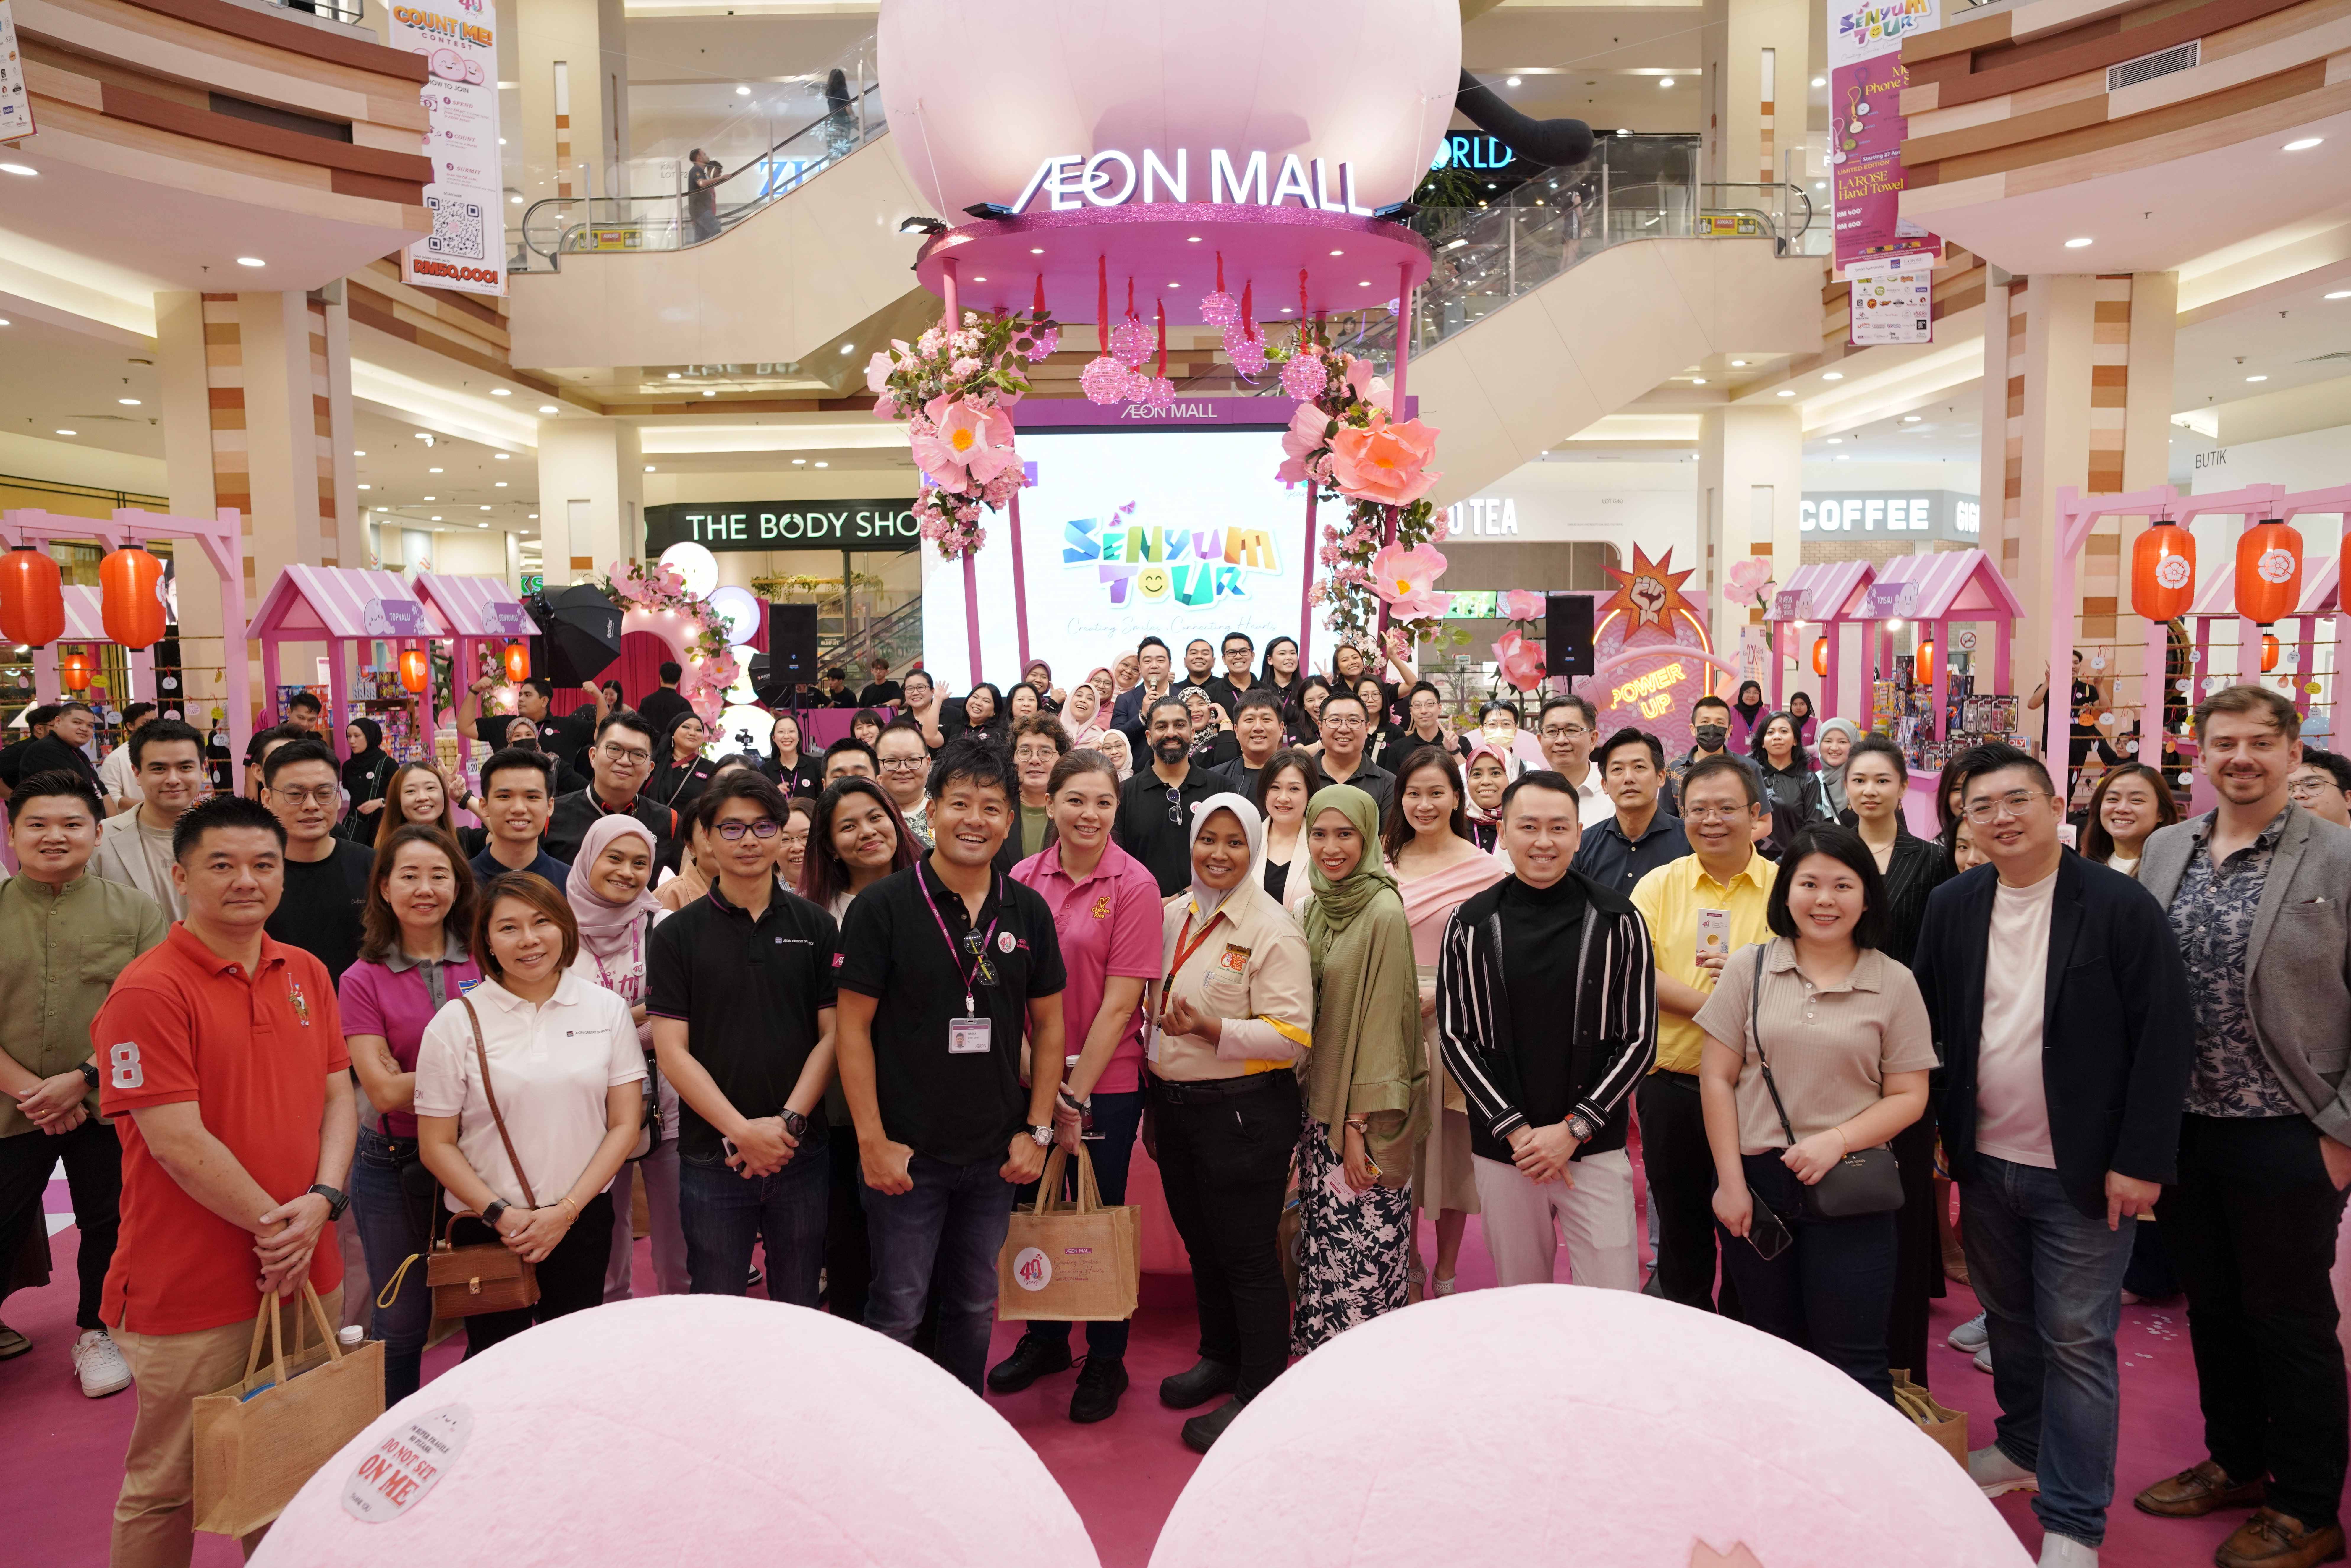 SENYUM TOUR” CELEBRATES CUSTOMERS BY CREATING SMILES AND  CONNECTING HEARTS